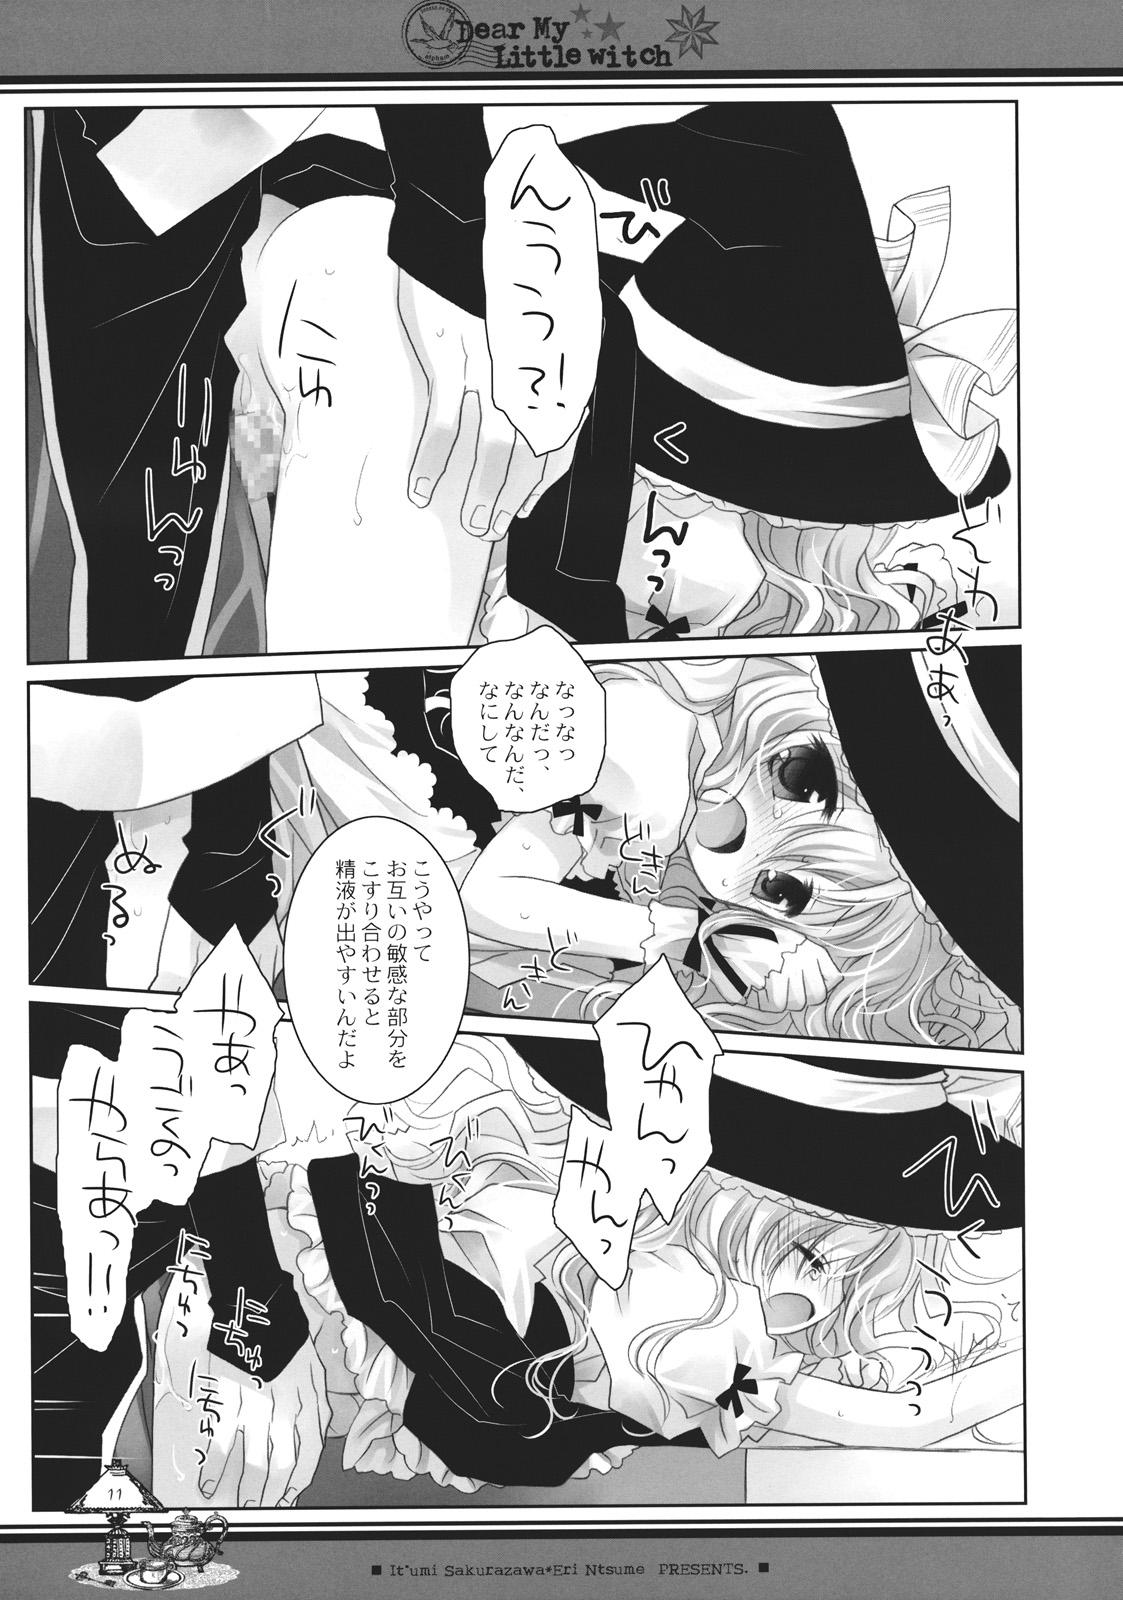 Mofos Dear My Little Witch - Touhou project Sextape - Page 11